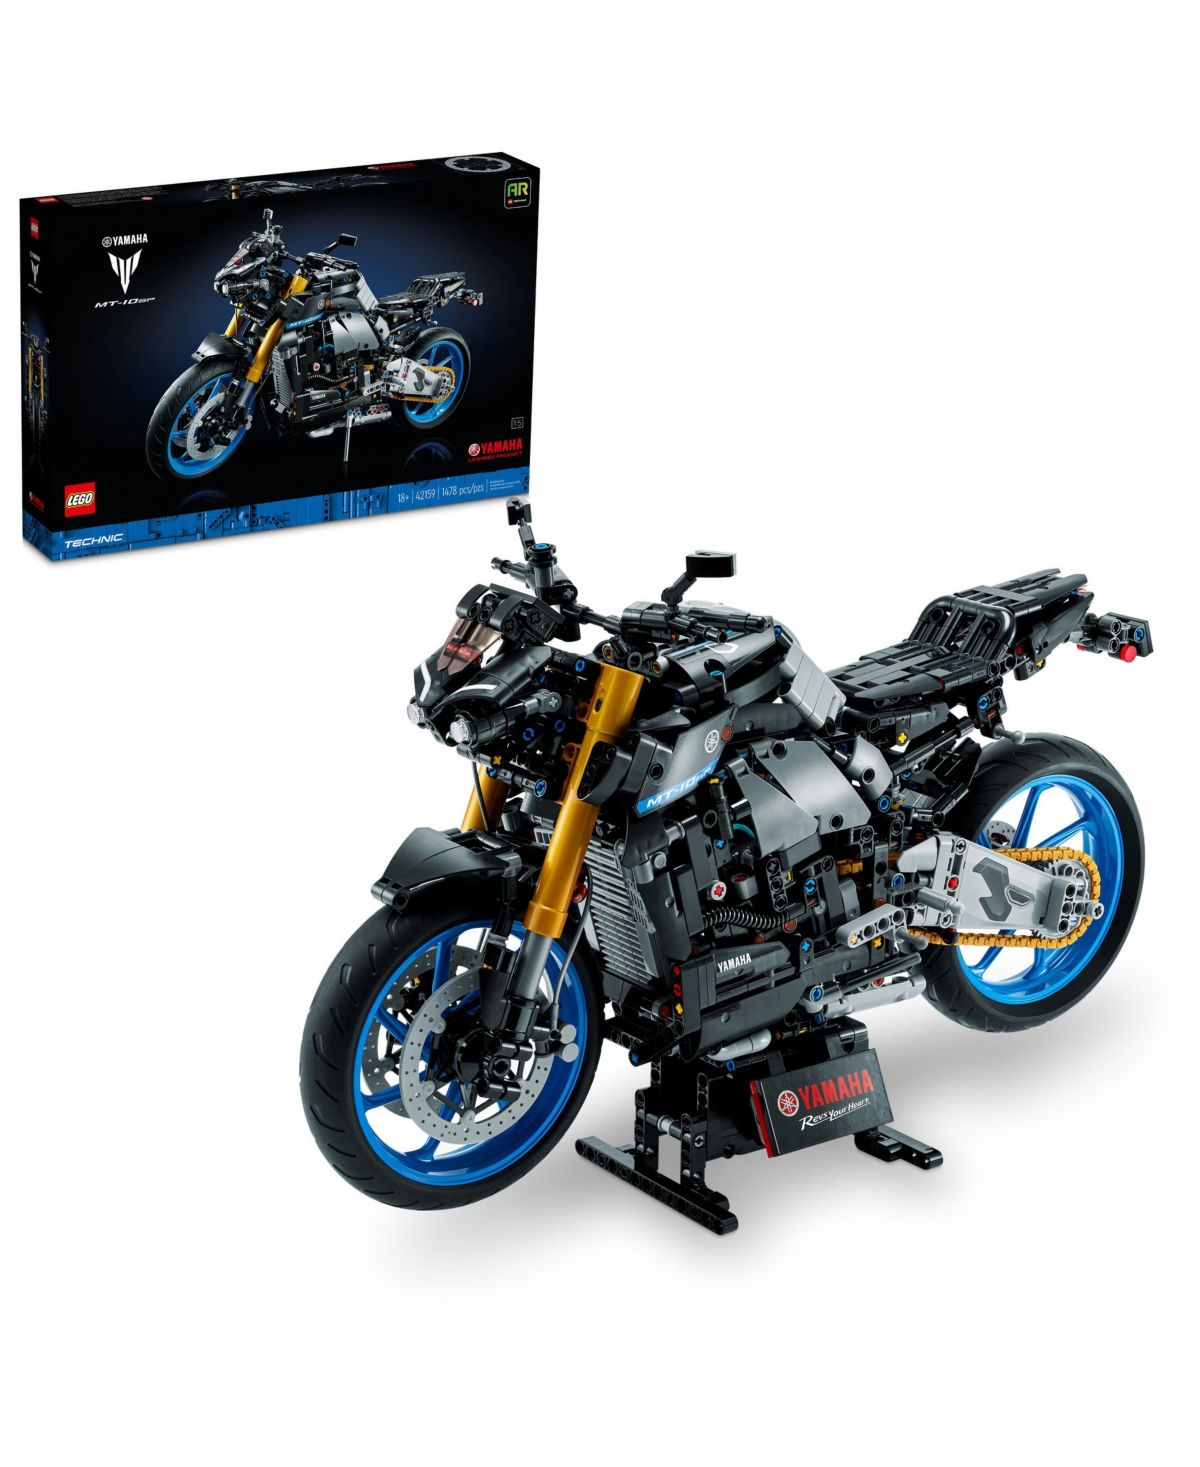 Lego Technic Yamaha Mt-10 Sp 42159, Building Kit For Adults 1,478 Pieces In Multicolor